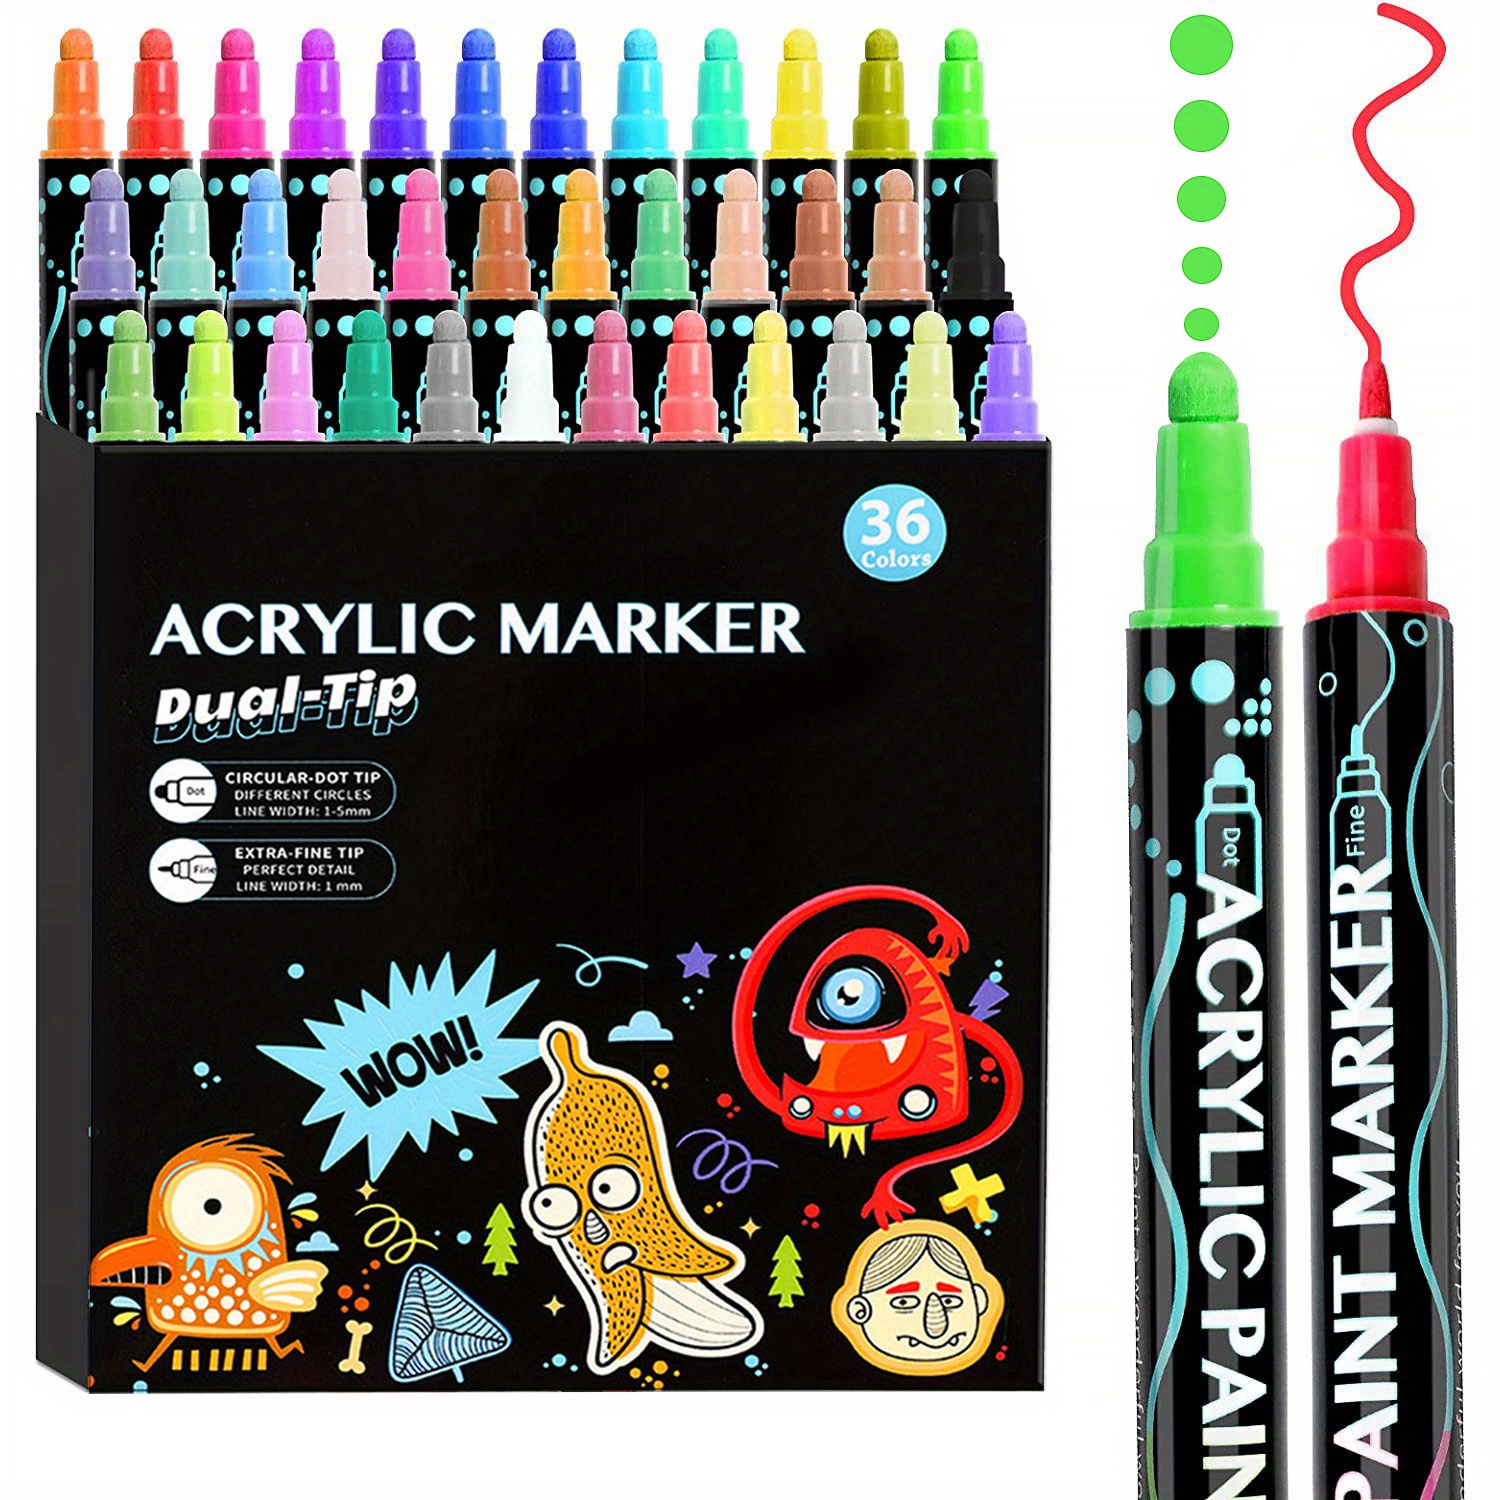 TOOLI-ART Acrylic Paint Markers Paint Pens Special Colors Set for Rock Painting, Canvas, Fabric, Glass, Mugs, Wood, Ceramics, Plastic, Multi-Surface